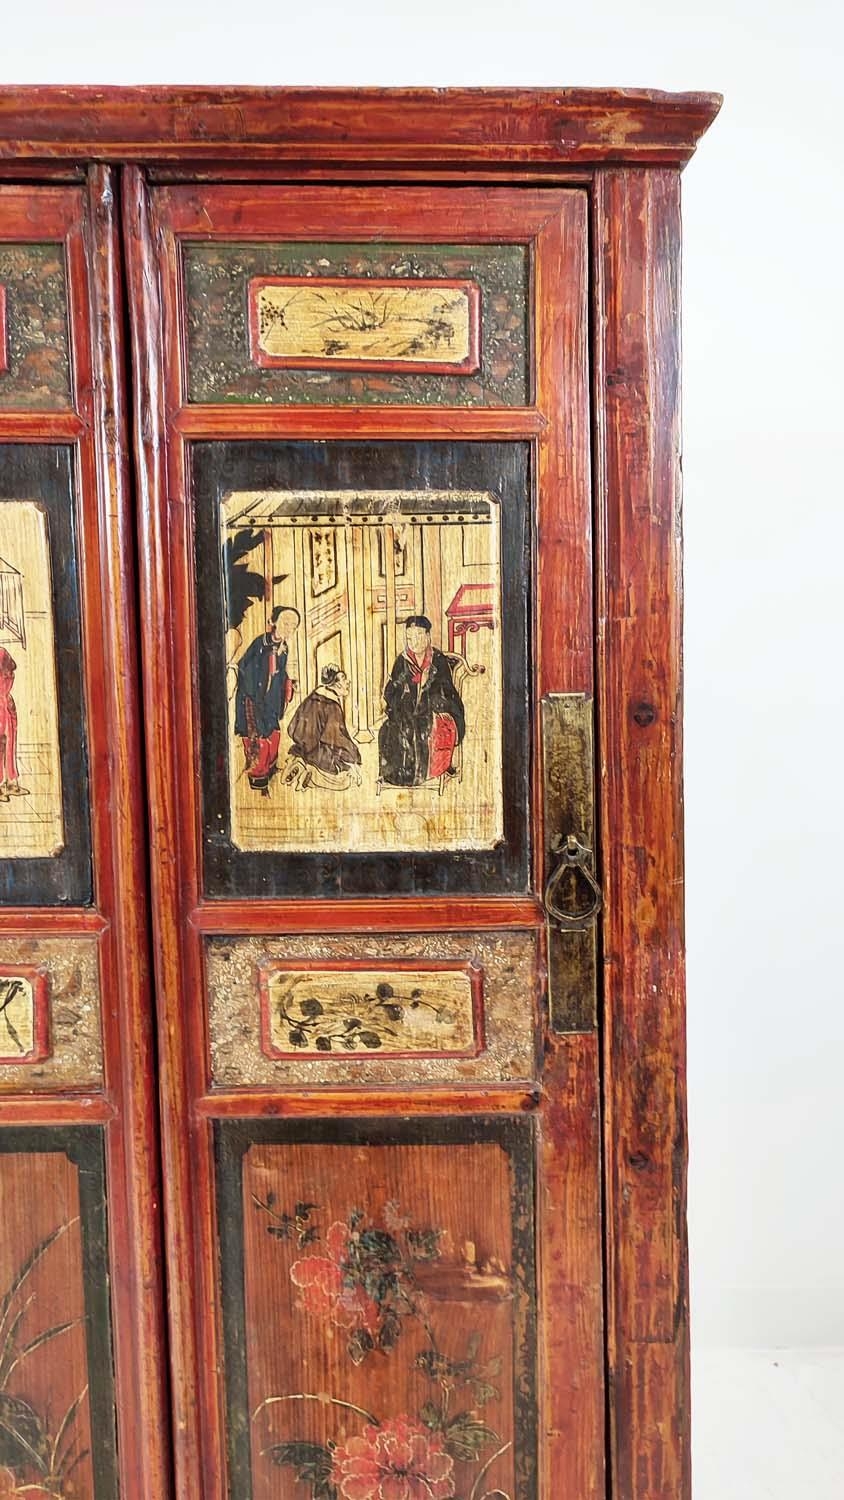 CHINESE WEDDING CABINET, in a decorative red lacquer finish depicting figural scenes and floral - Image 4 of 9